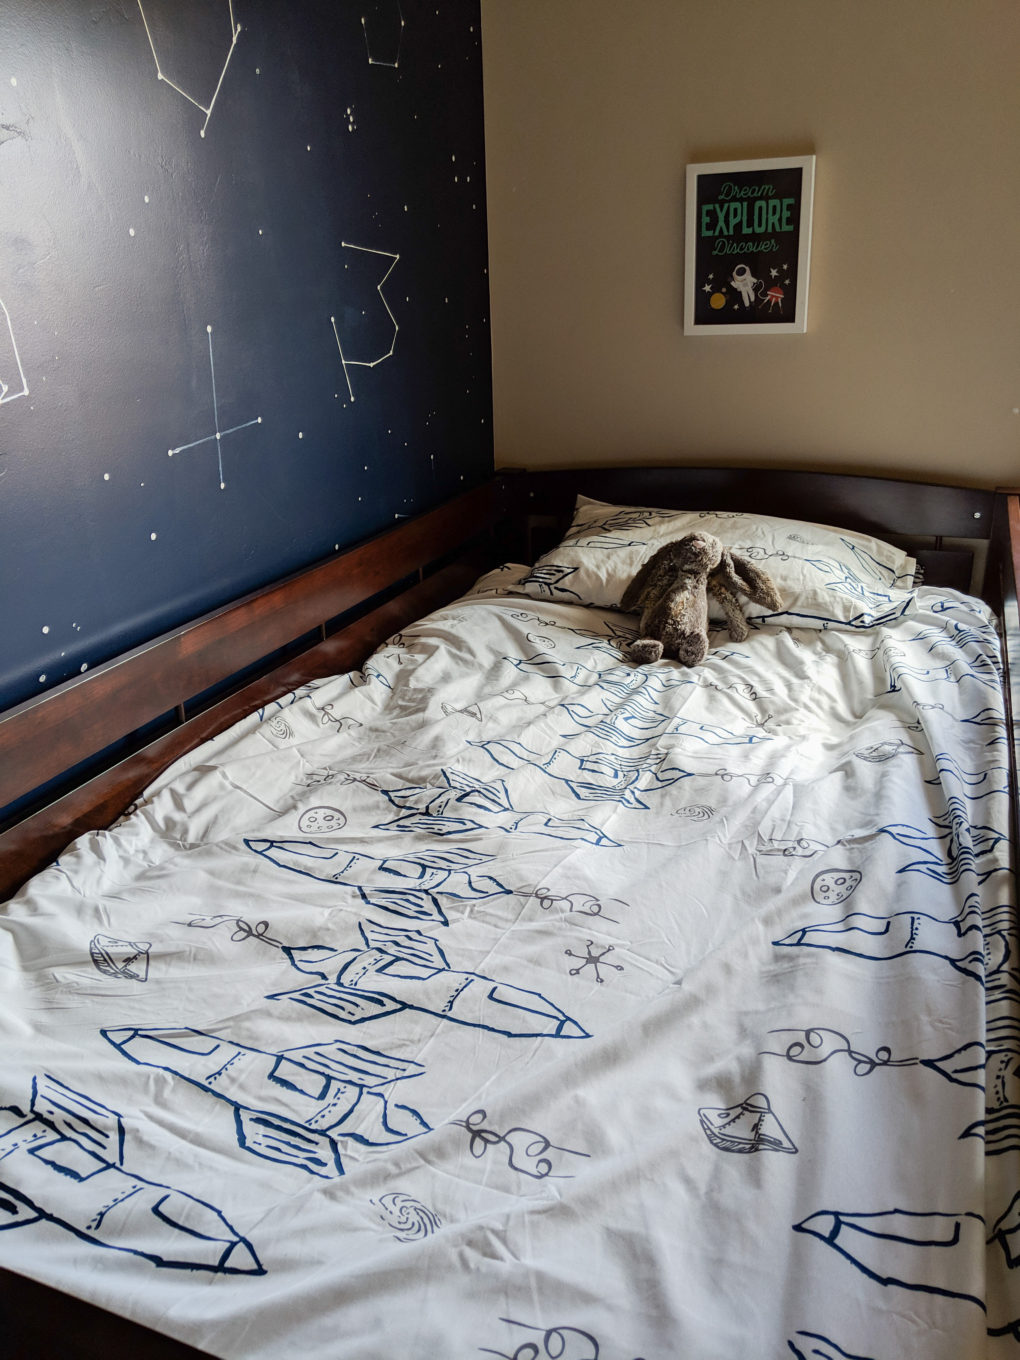 Rocket ship duvet cover for a low loft bed in our space and night sky star themed bedroom.